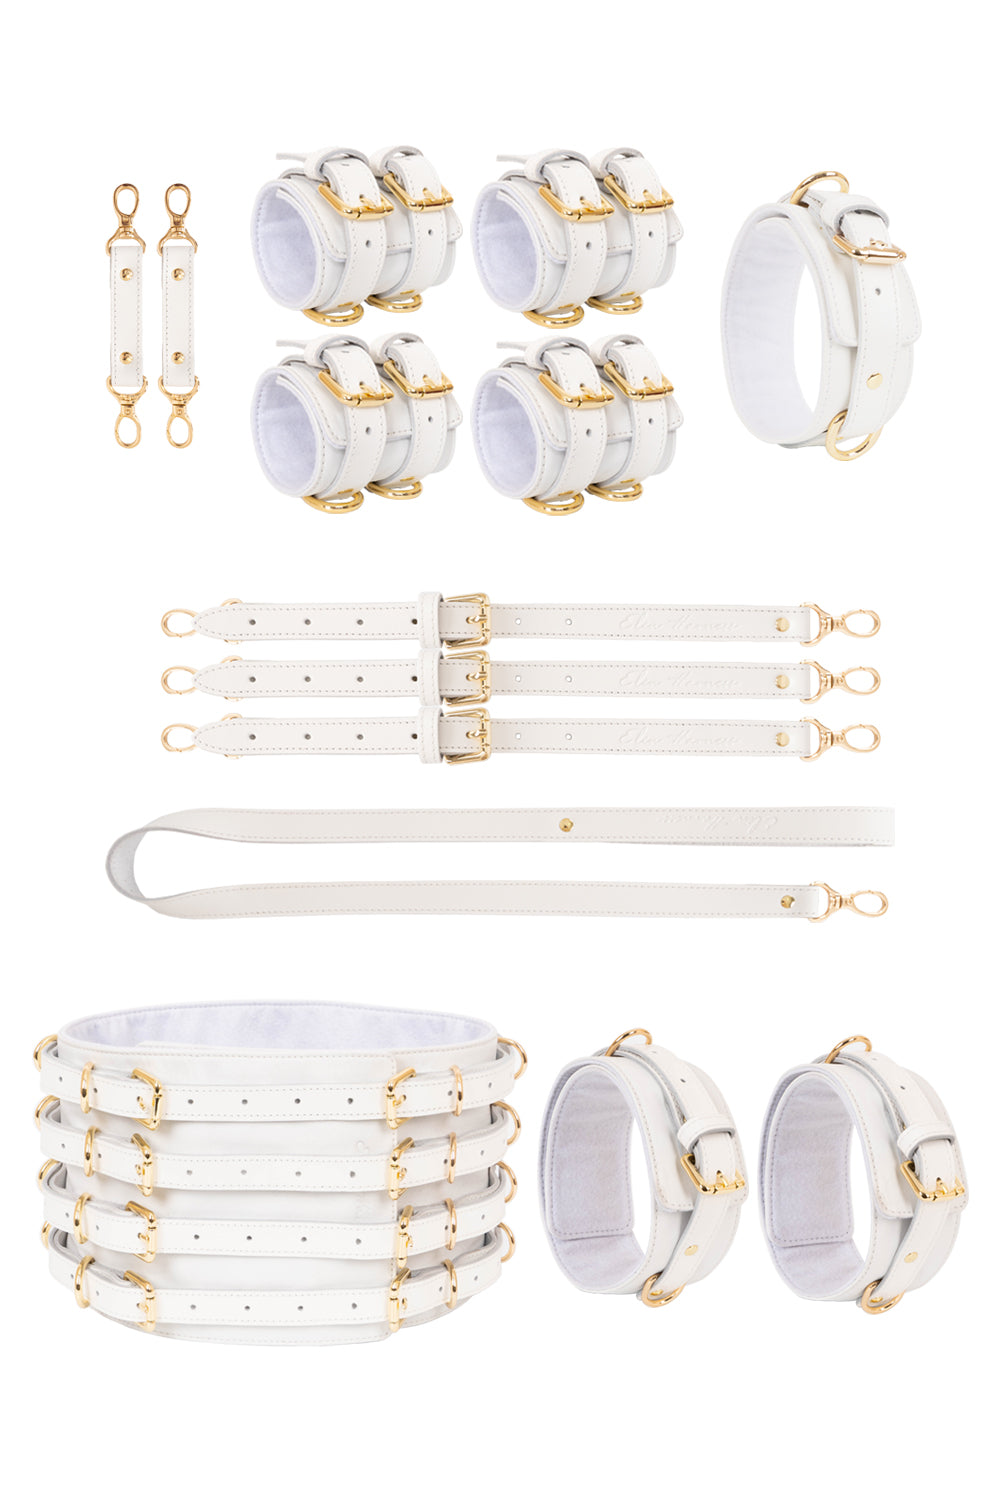 White Luxury Full Leather Set with Wide Belt and Cuffs